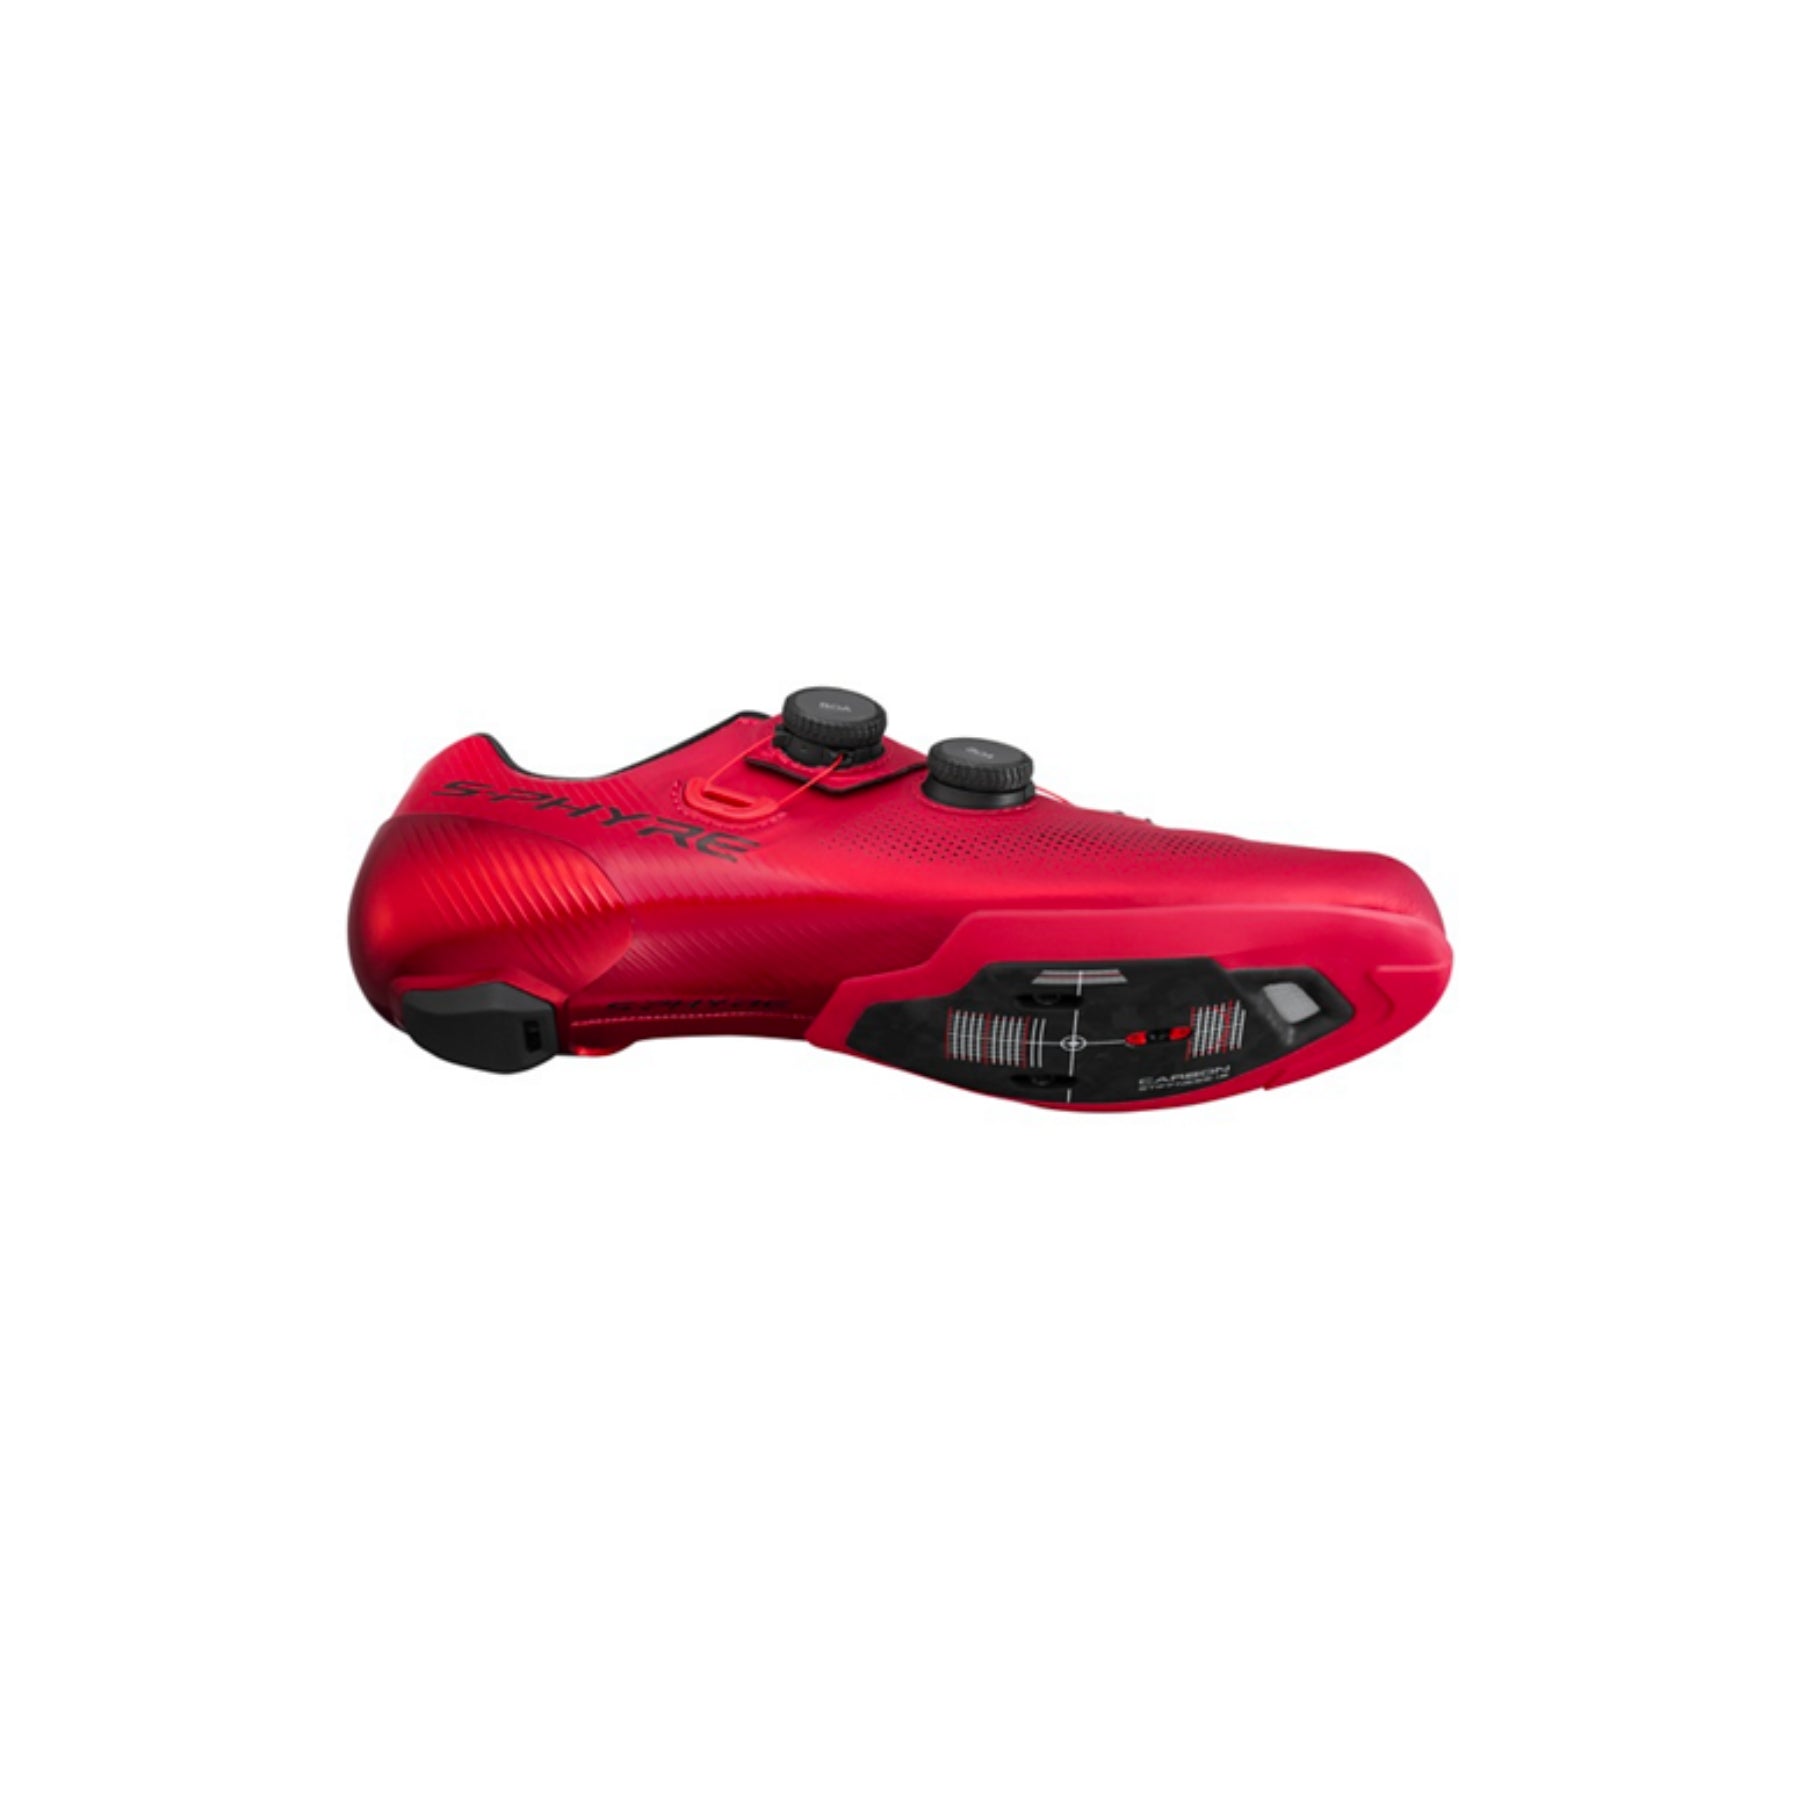 Shimano RC903 S-Phyre Red